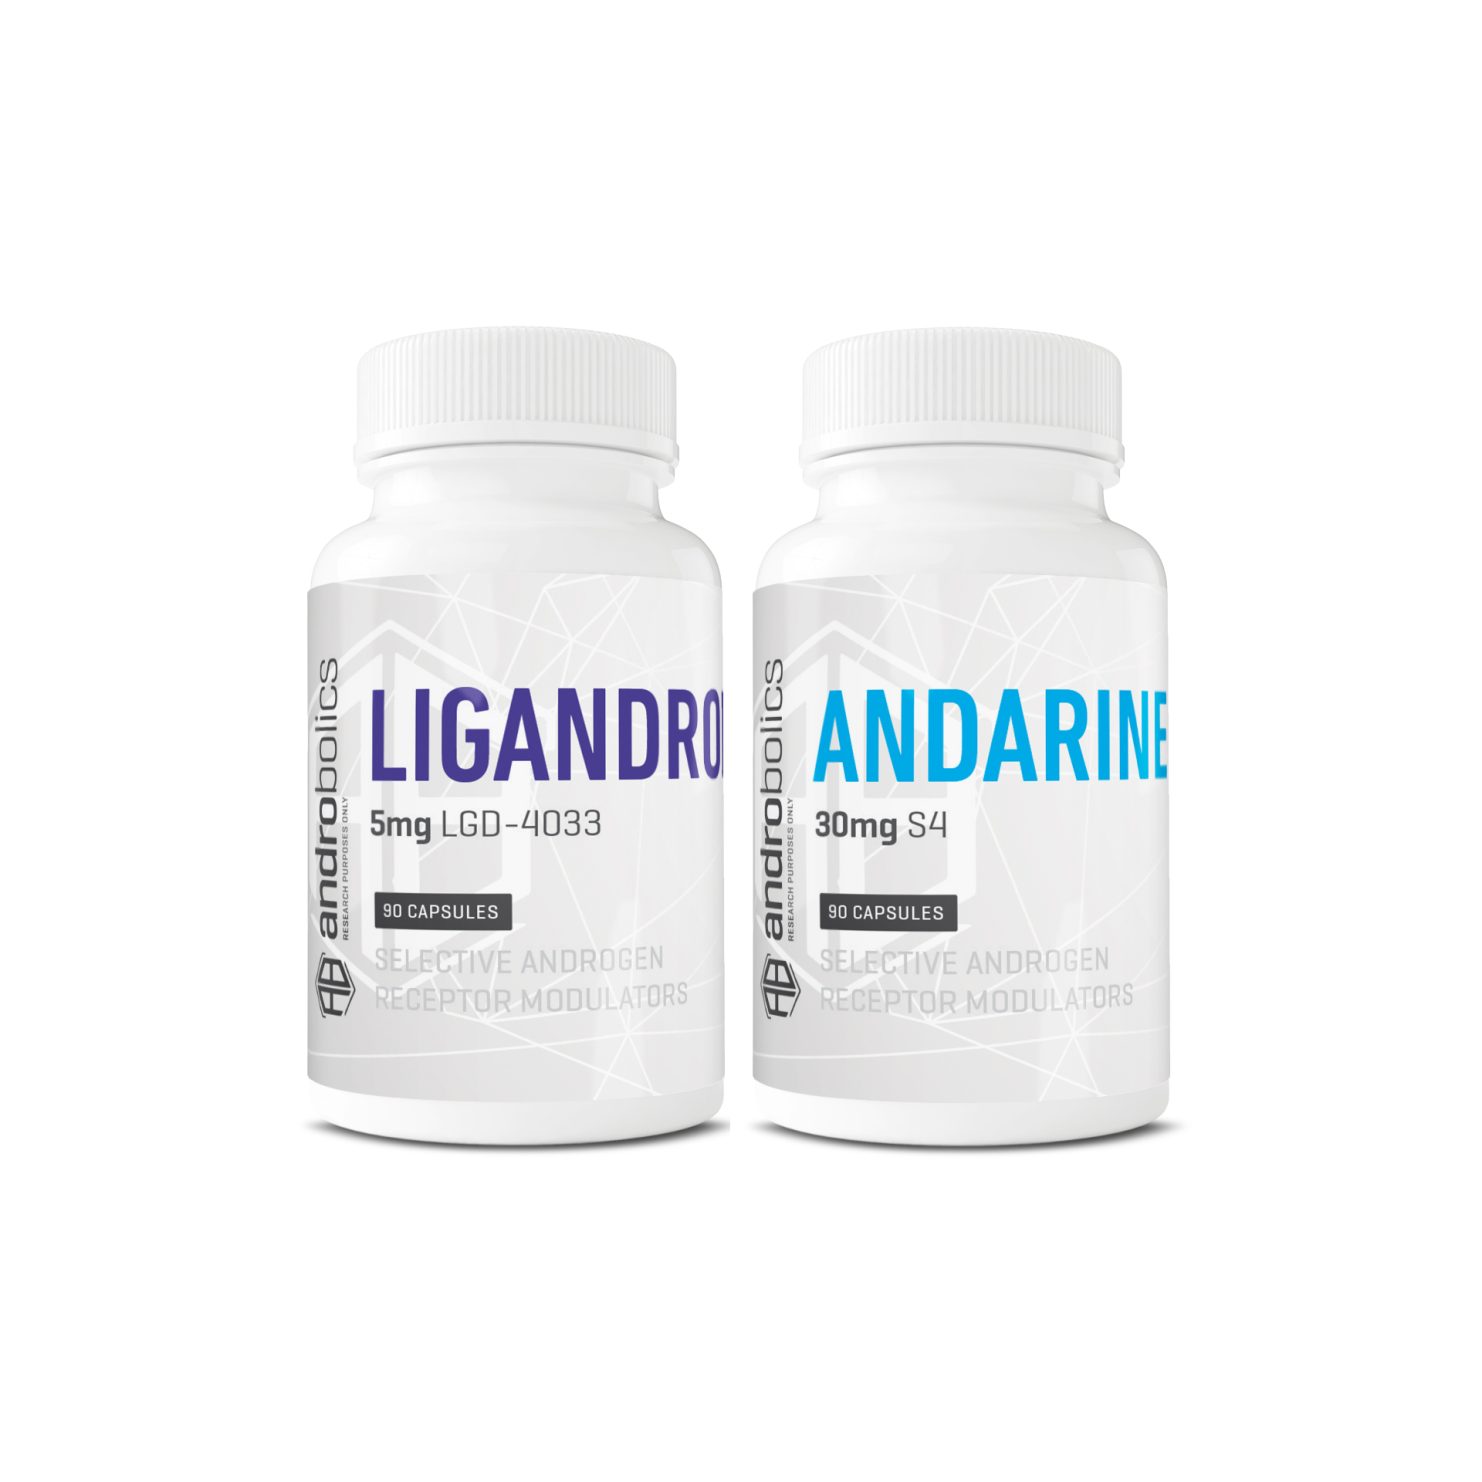 Strength-Boosting SARMs Stack with Ligandrol and Andarine bottles from Androbolics.